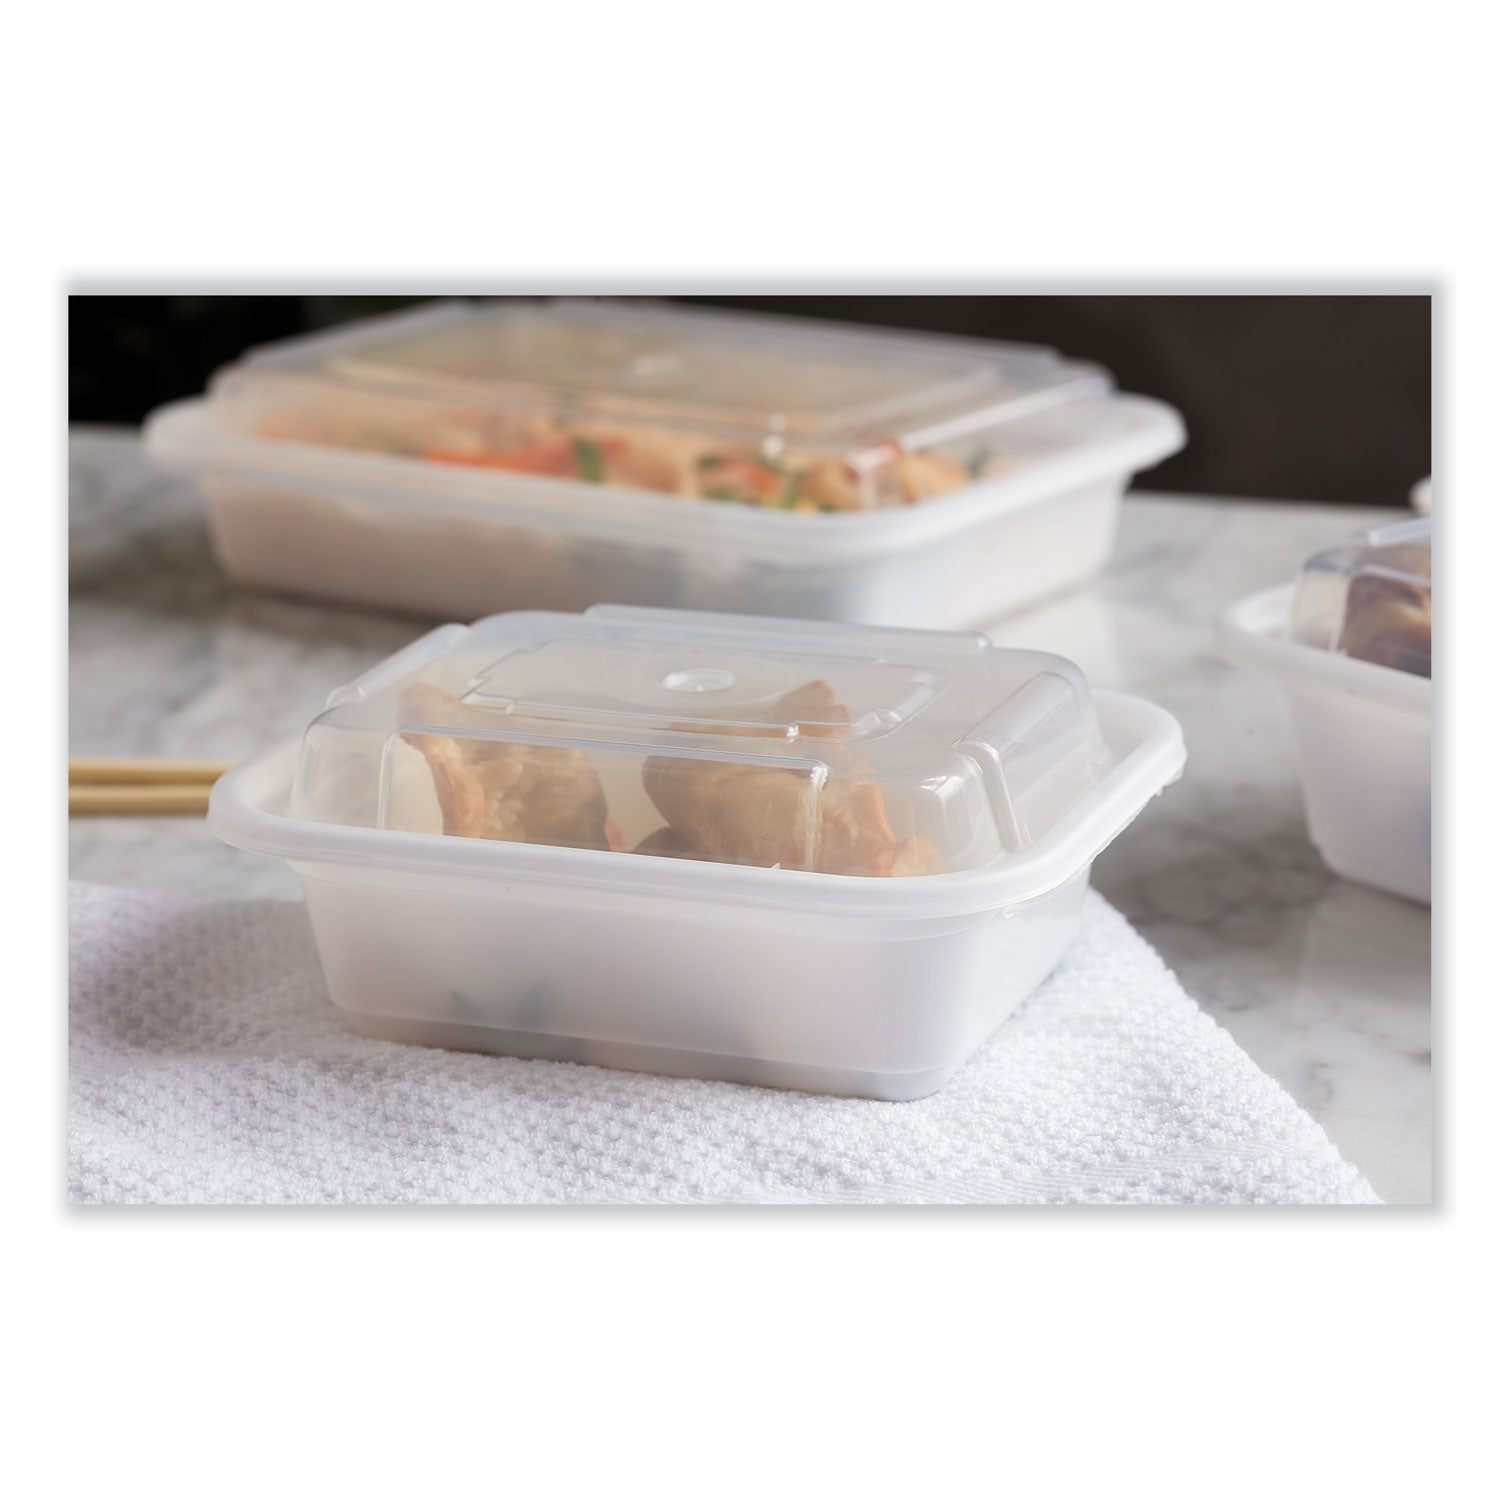 newspring-versatainer-microwavable-containers-rectangular-12-oz-45-x-55-x-212-white-clear-plastic-150-carton_pctnc818 - 3